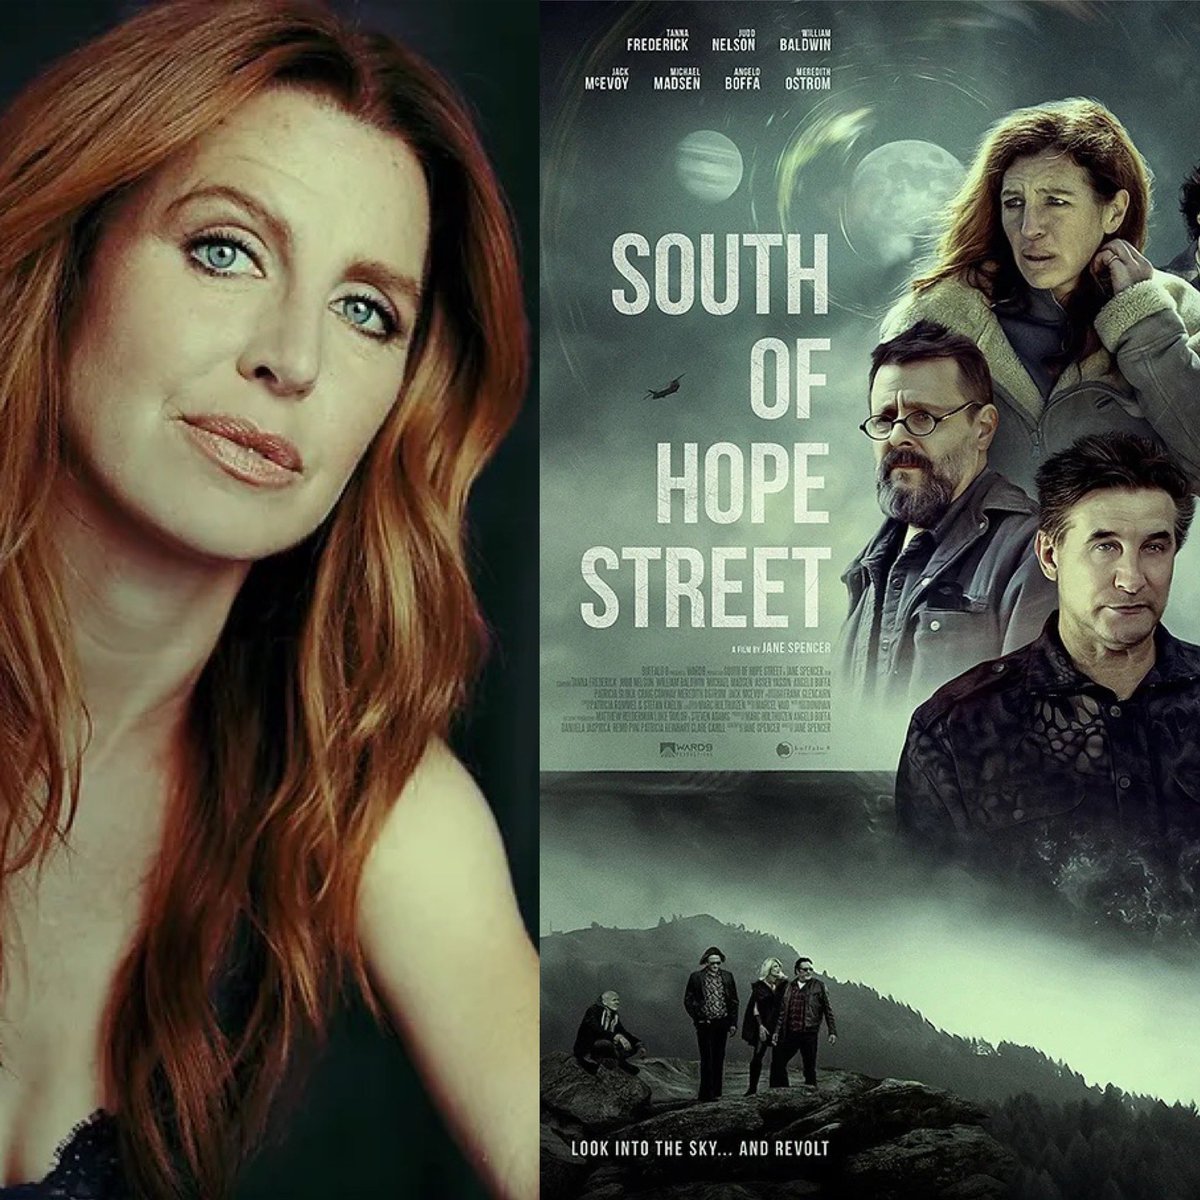 Client @TannaF in new film released by @Buffalo8Pro April 19th. 
#tannafrederick #billybaldwin #juddnelson #michaelmadsen #southofhopestreet #director #janespencer